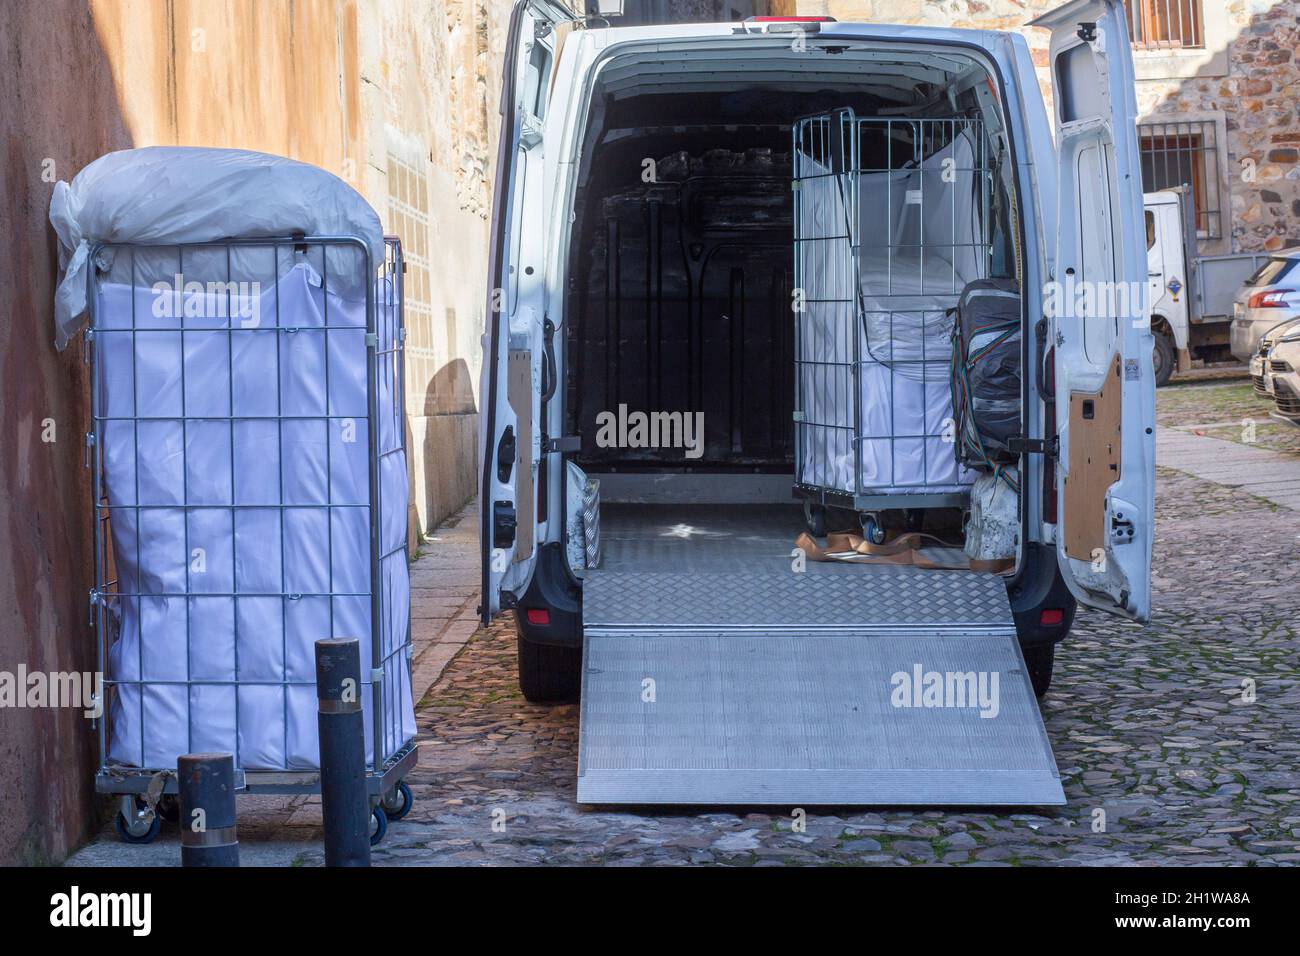 Picking dirt laundry carts. The van equipped with lift ramp is parked in an old town city Stock Photo